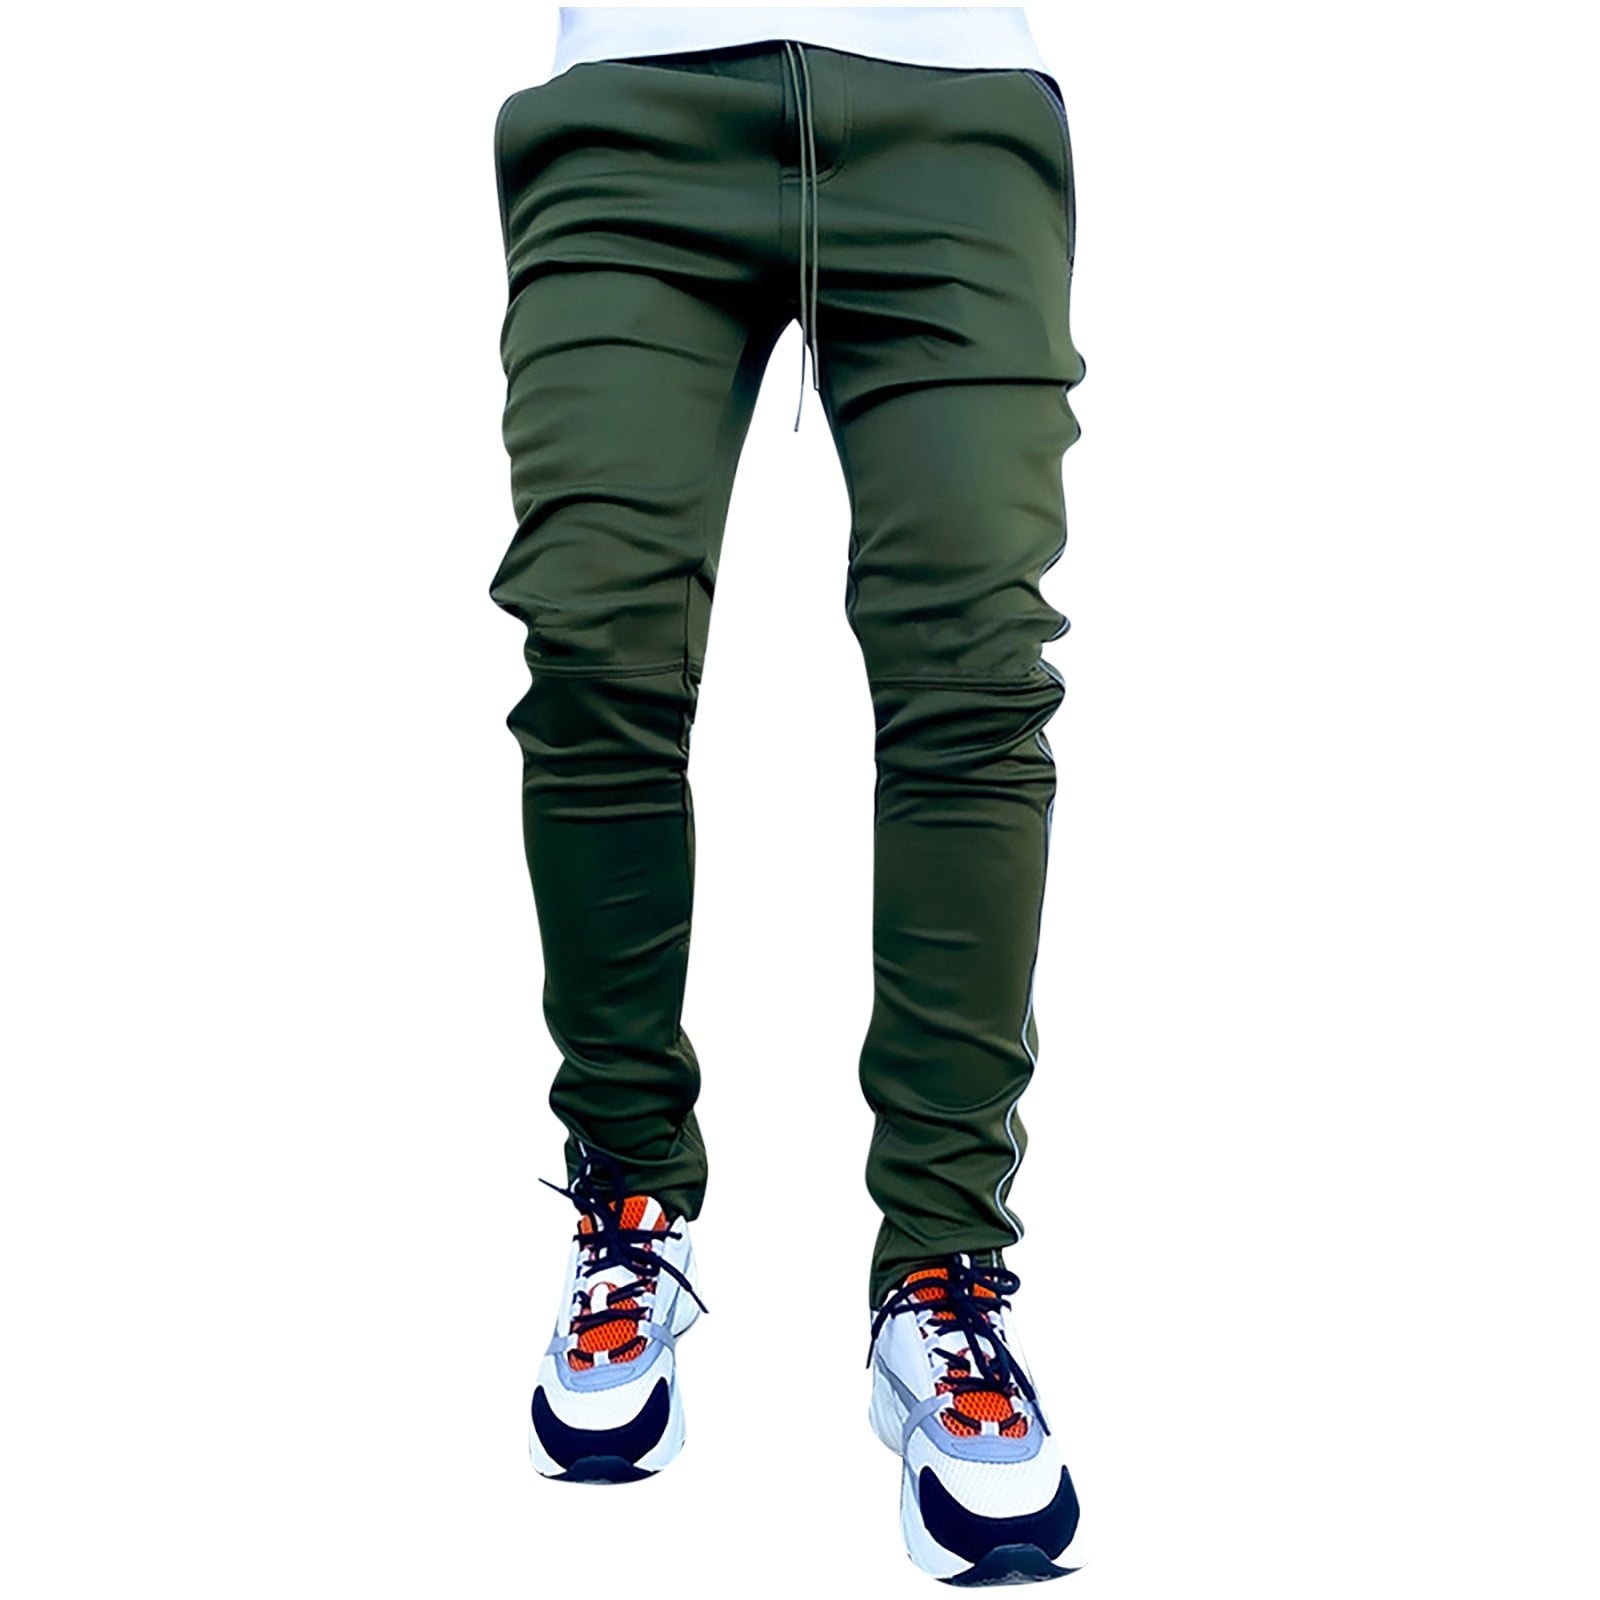 Men Sweatpants Track Pants Casual Loose Fit Straight Leg Trousers Athletic  Joggers Lounge Pants for Fishing Driving Jogging Walking Training , XL Size  Green 